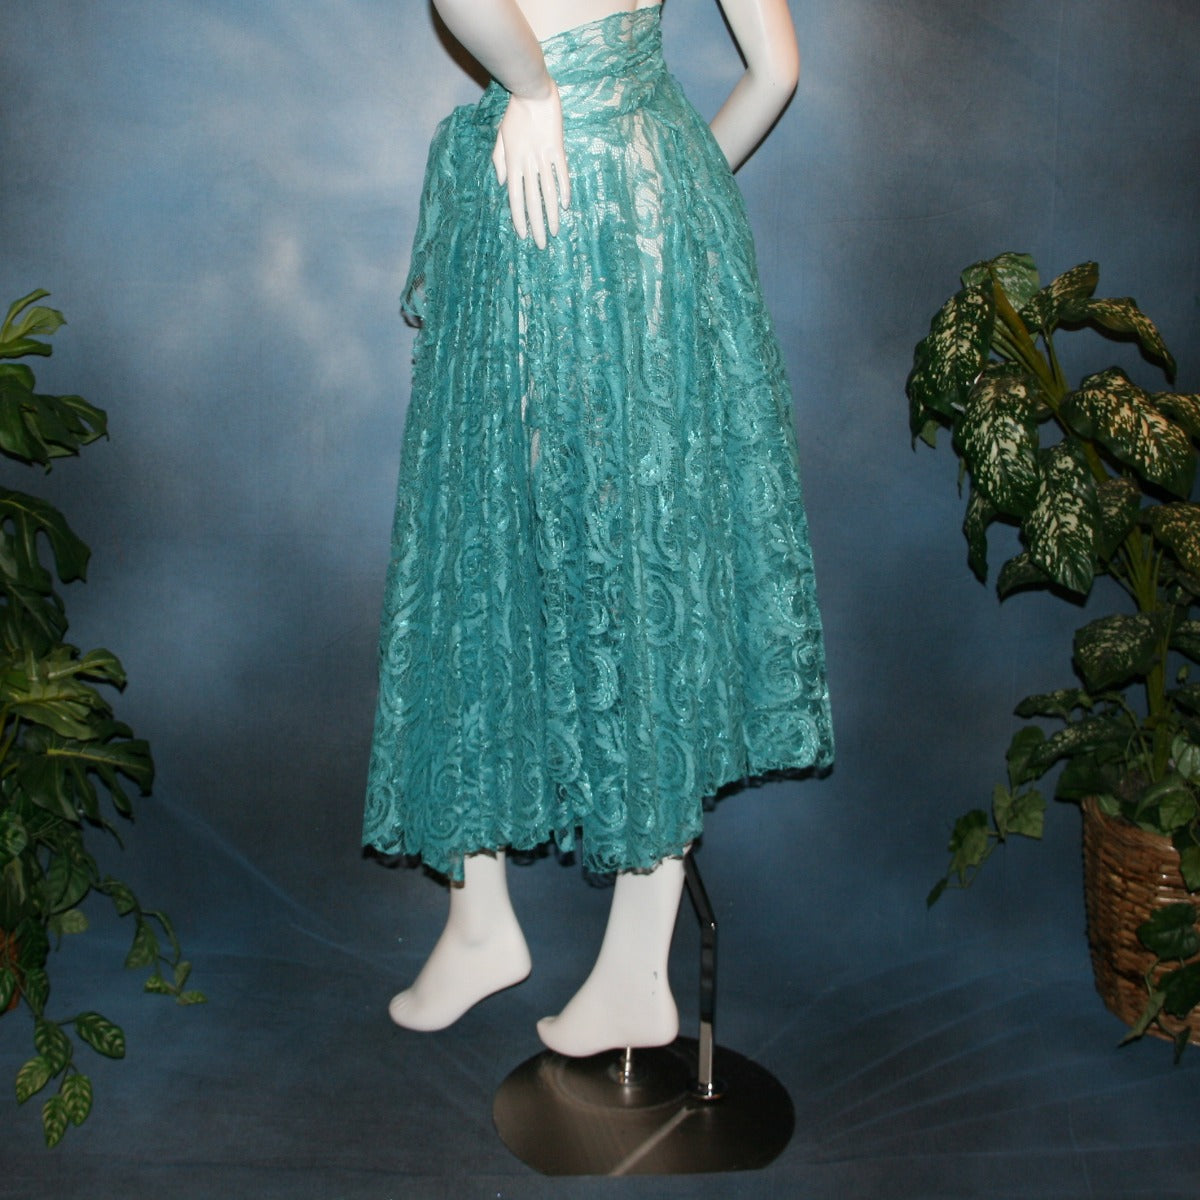 Crystal's Creations back view of Aqua lace ballroom skirt, wrap style, was created with yards of aqua lace, many panels shaped like large petals.